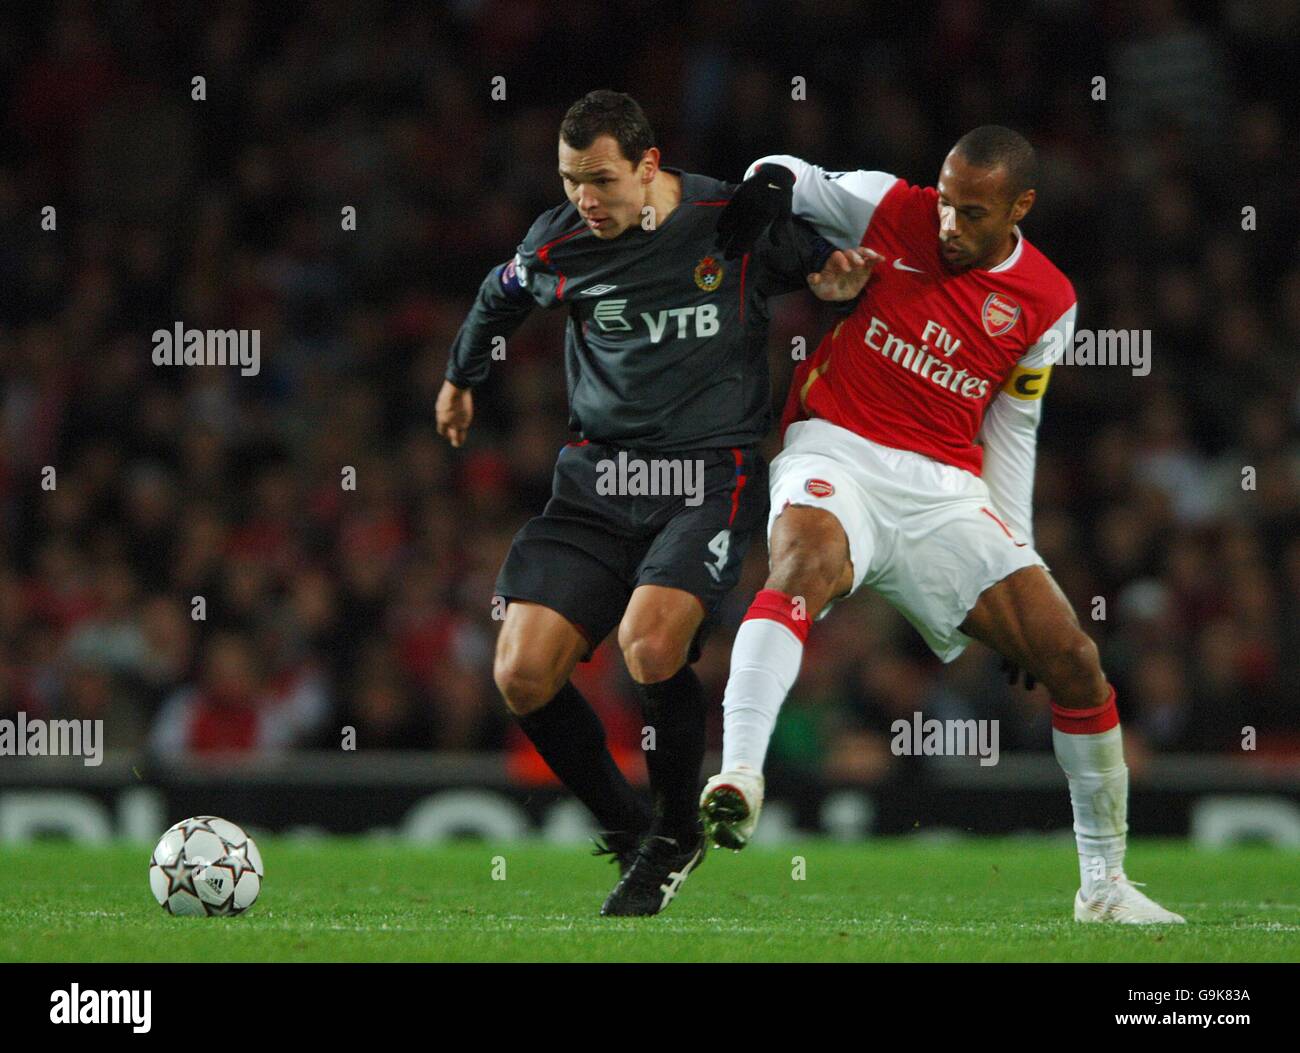 Soccer - UEFA Champions League - Group G - Arsenal v CSKA Moscow - Emirates Stadium. Arsenal's Thierry Henry is fouled by CSKA Moscow's Sergei Ignashevich as they battle for the ball Stock Photo